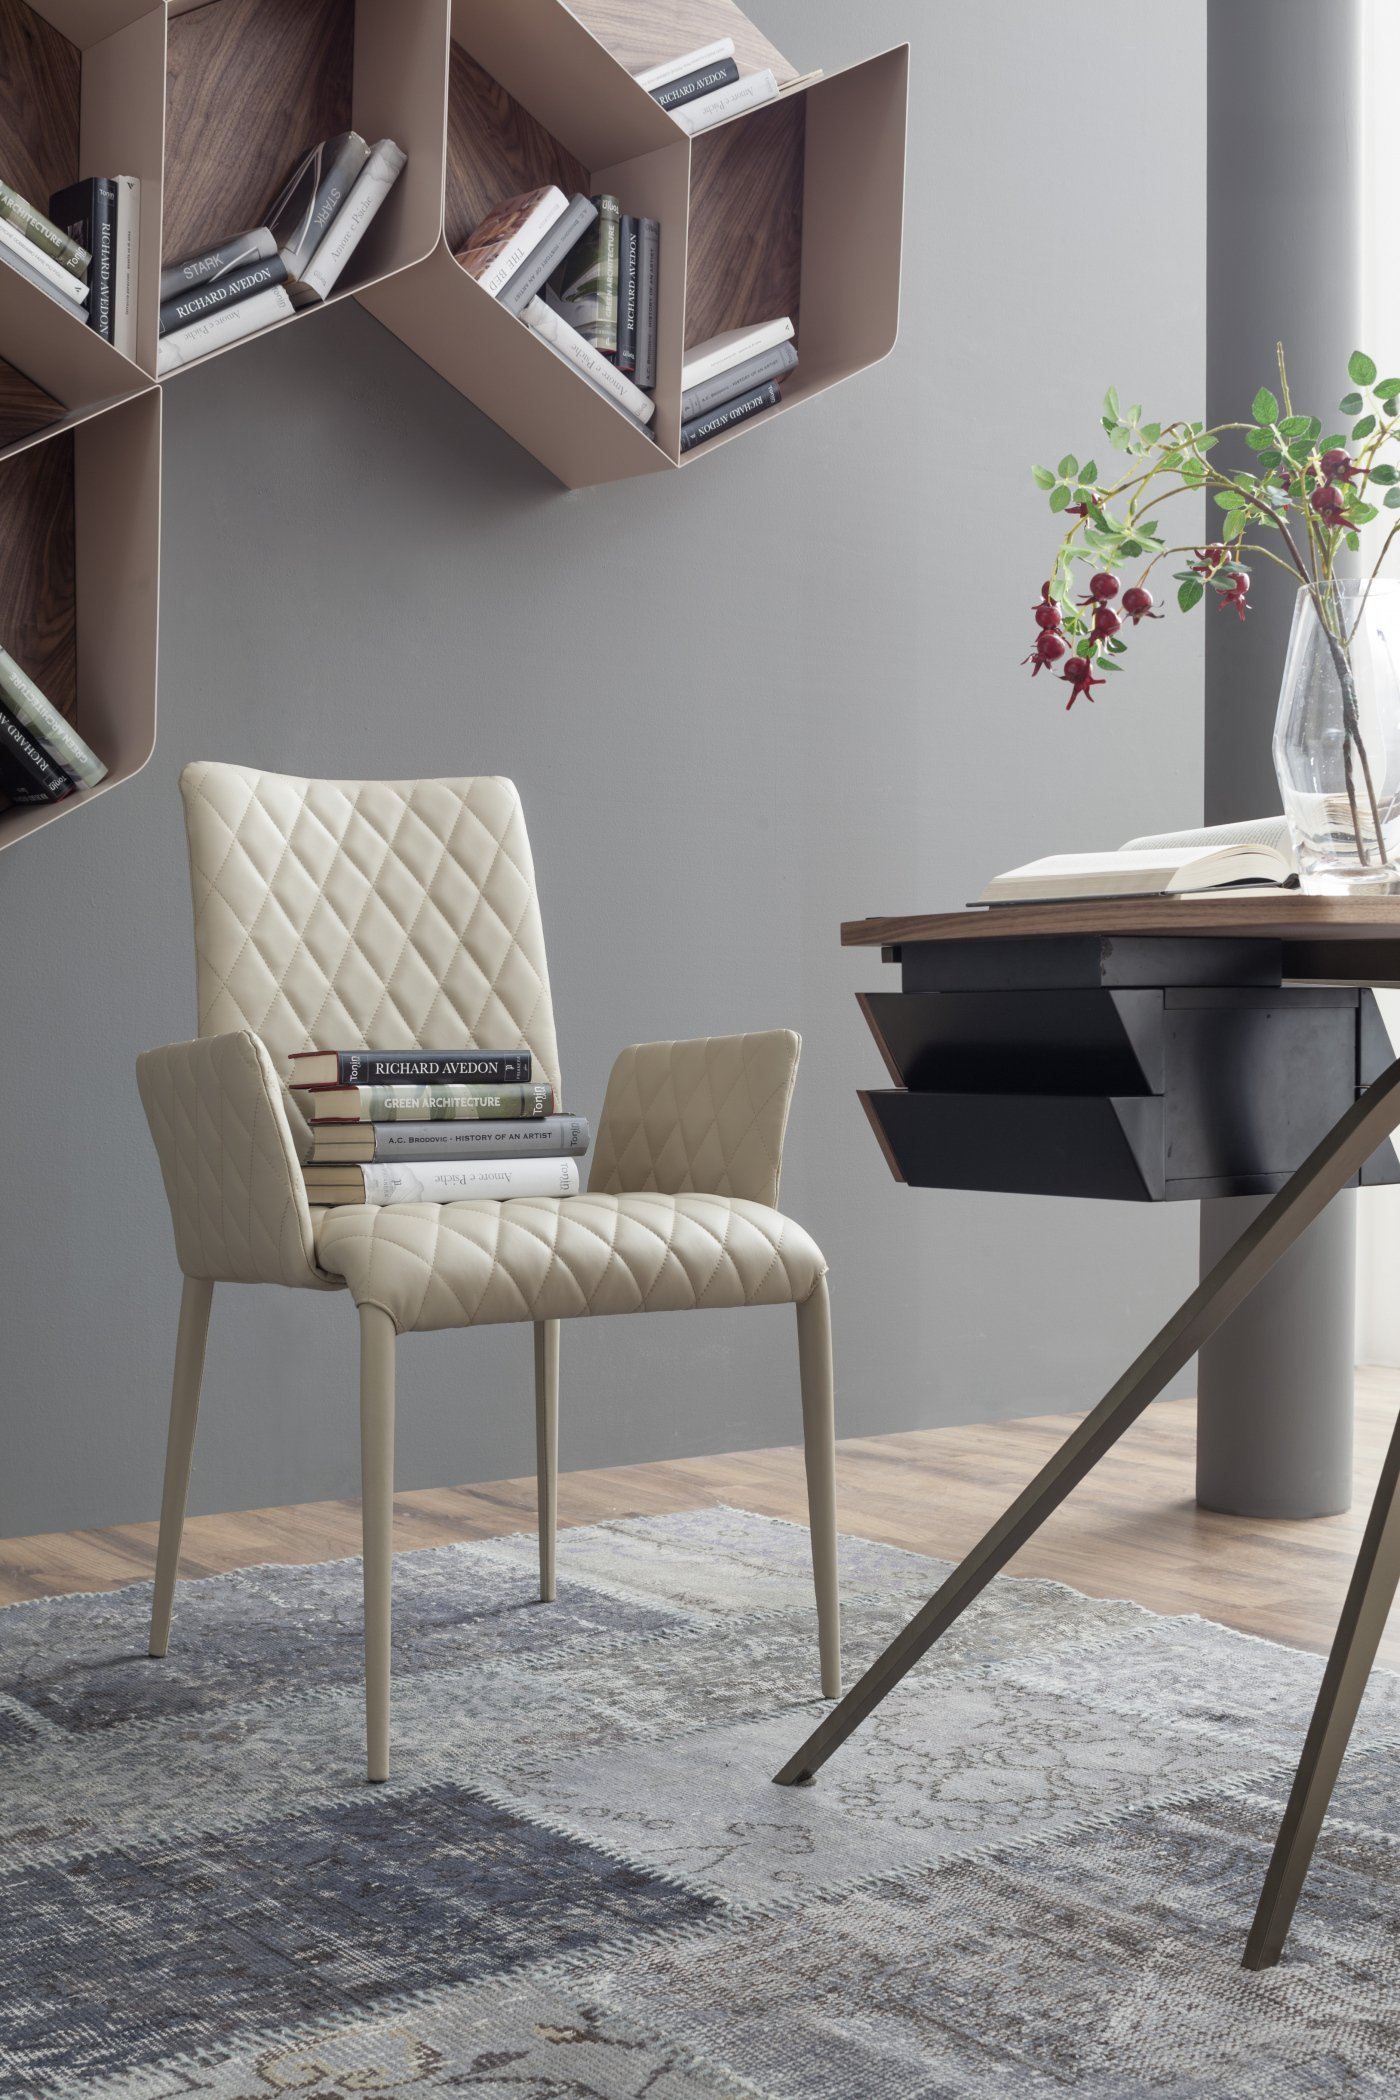 Kosmos – Coming both as a chair or as a small armchair, with or without armrests